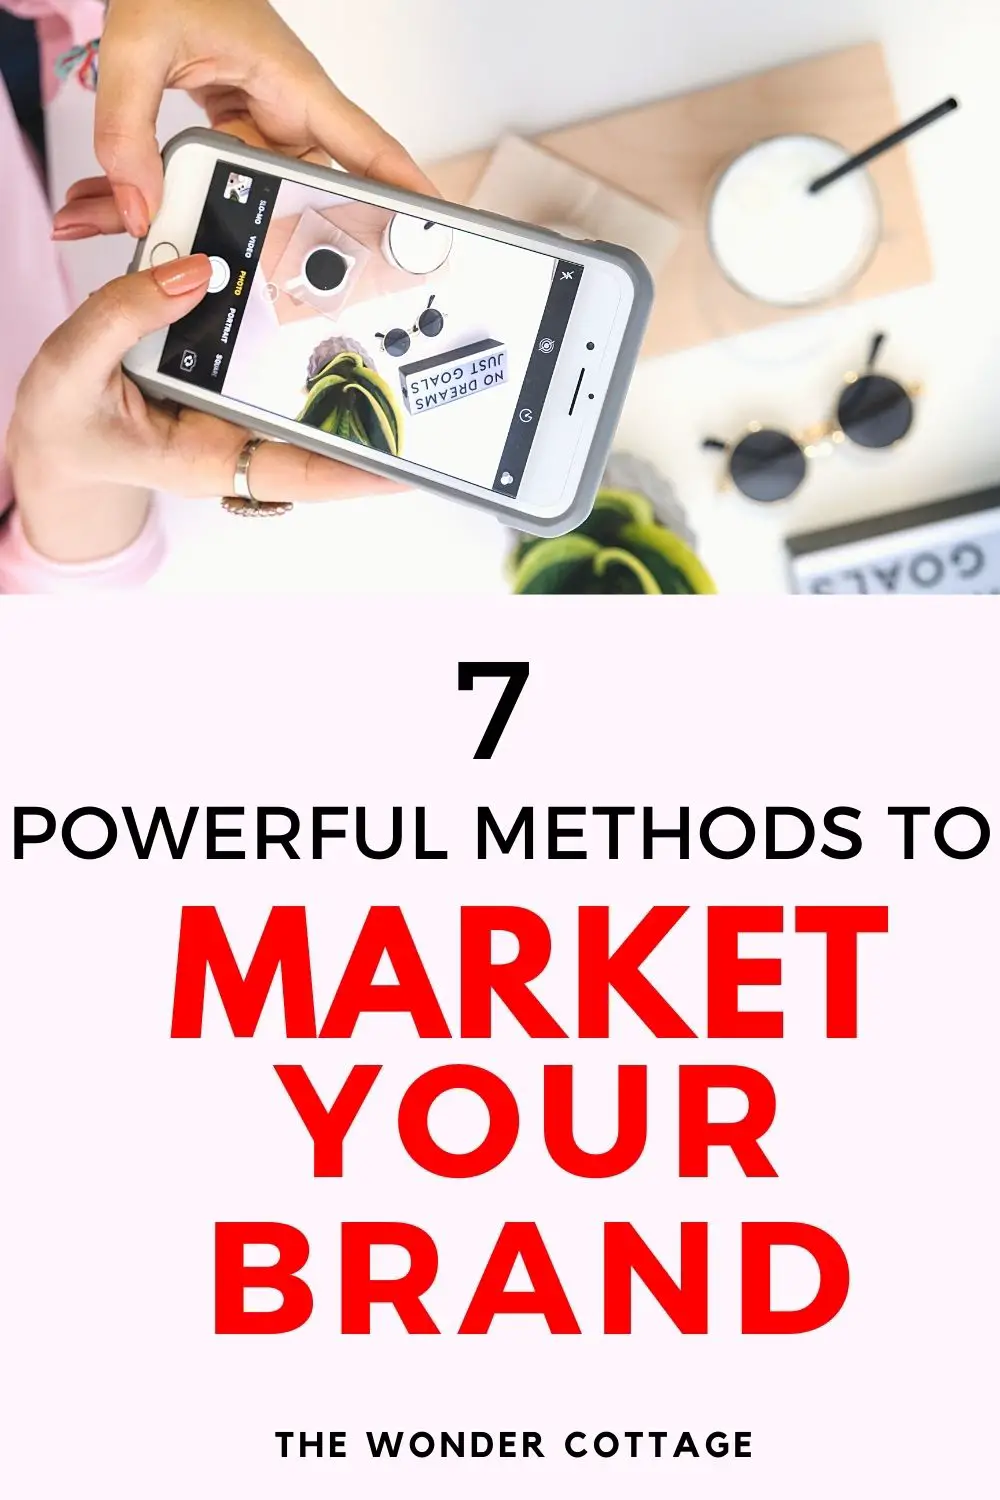 7 powerful methods to market your brand